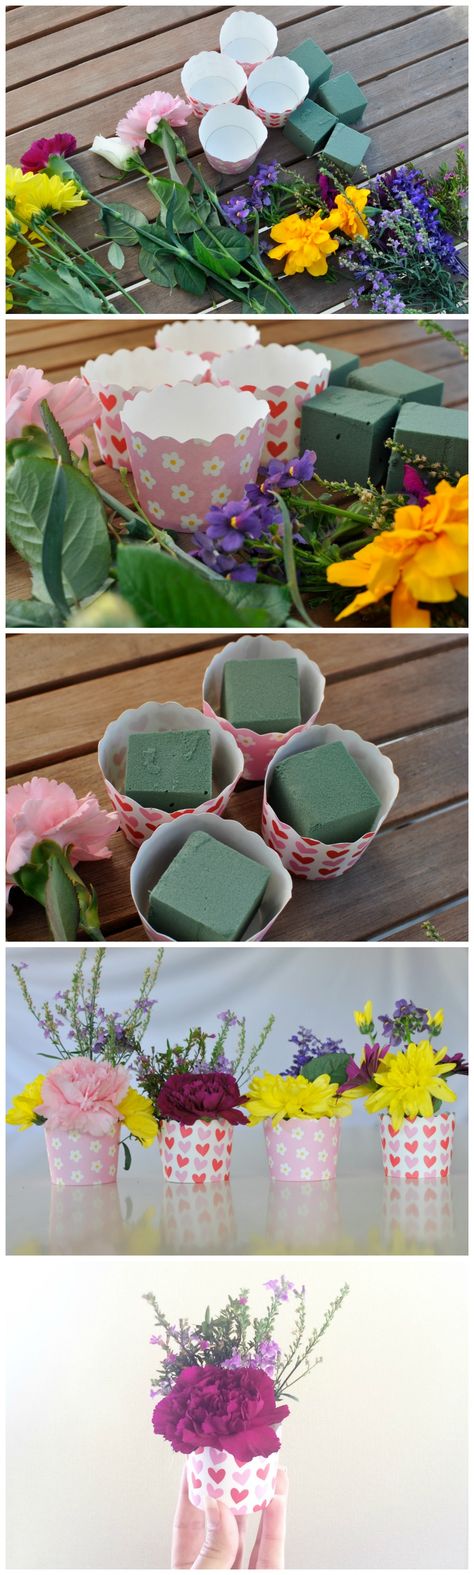 Mother's Day Gift Idea: Use a decorative cupcake case to make a mini flower arrangement. Kids could do it themselves! Diy, Crafts, Floral Arrangements, Diy Mother's Day, Mothers Day Crafts, Gift Ideas, Diy Flower Arrangements, Mothers Day Decor, Diy Flowers